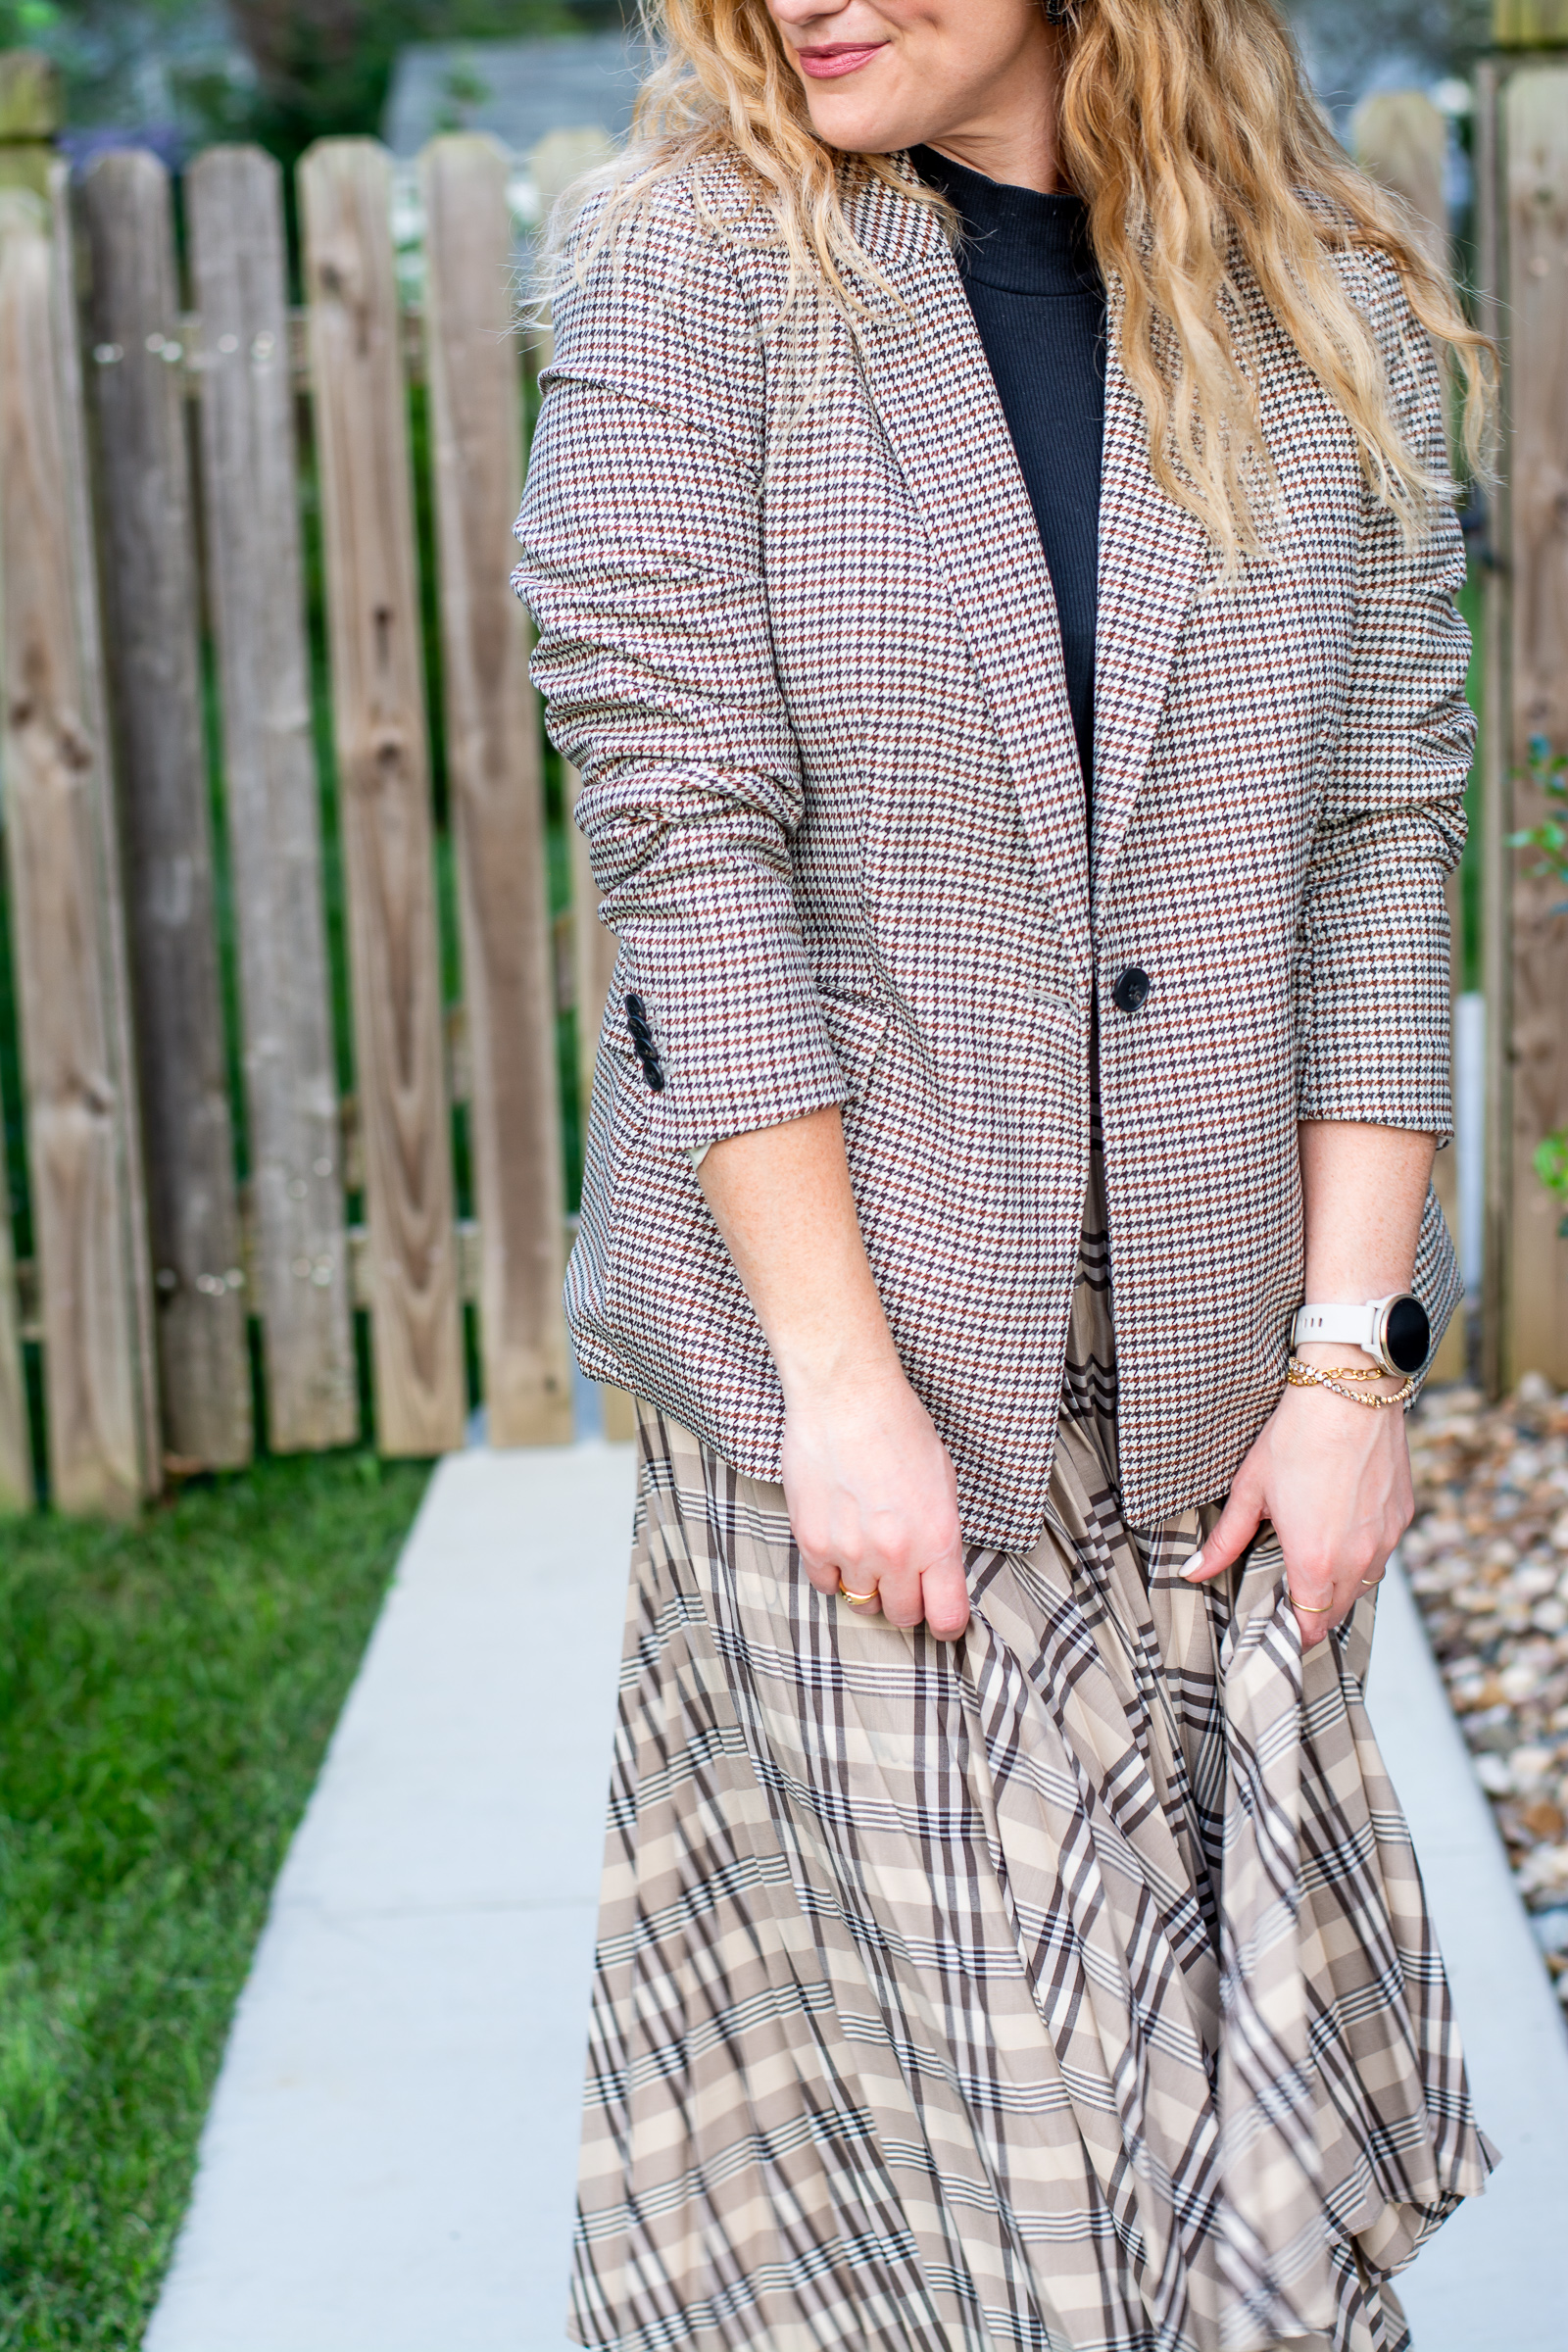 Fall Trend: Mixing Academic Prints. | Le Stylo Rouge